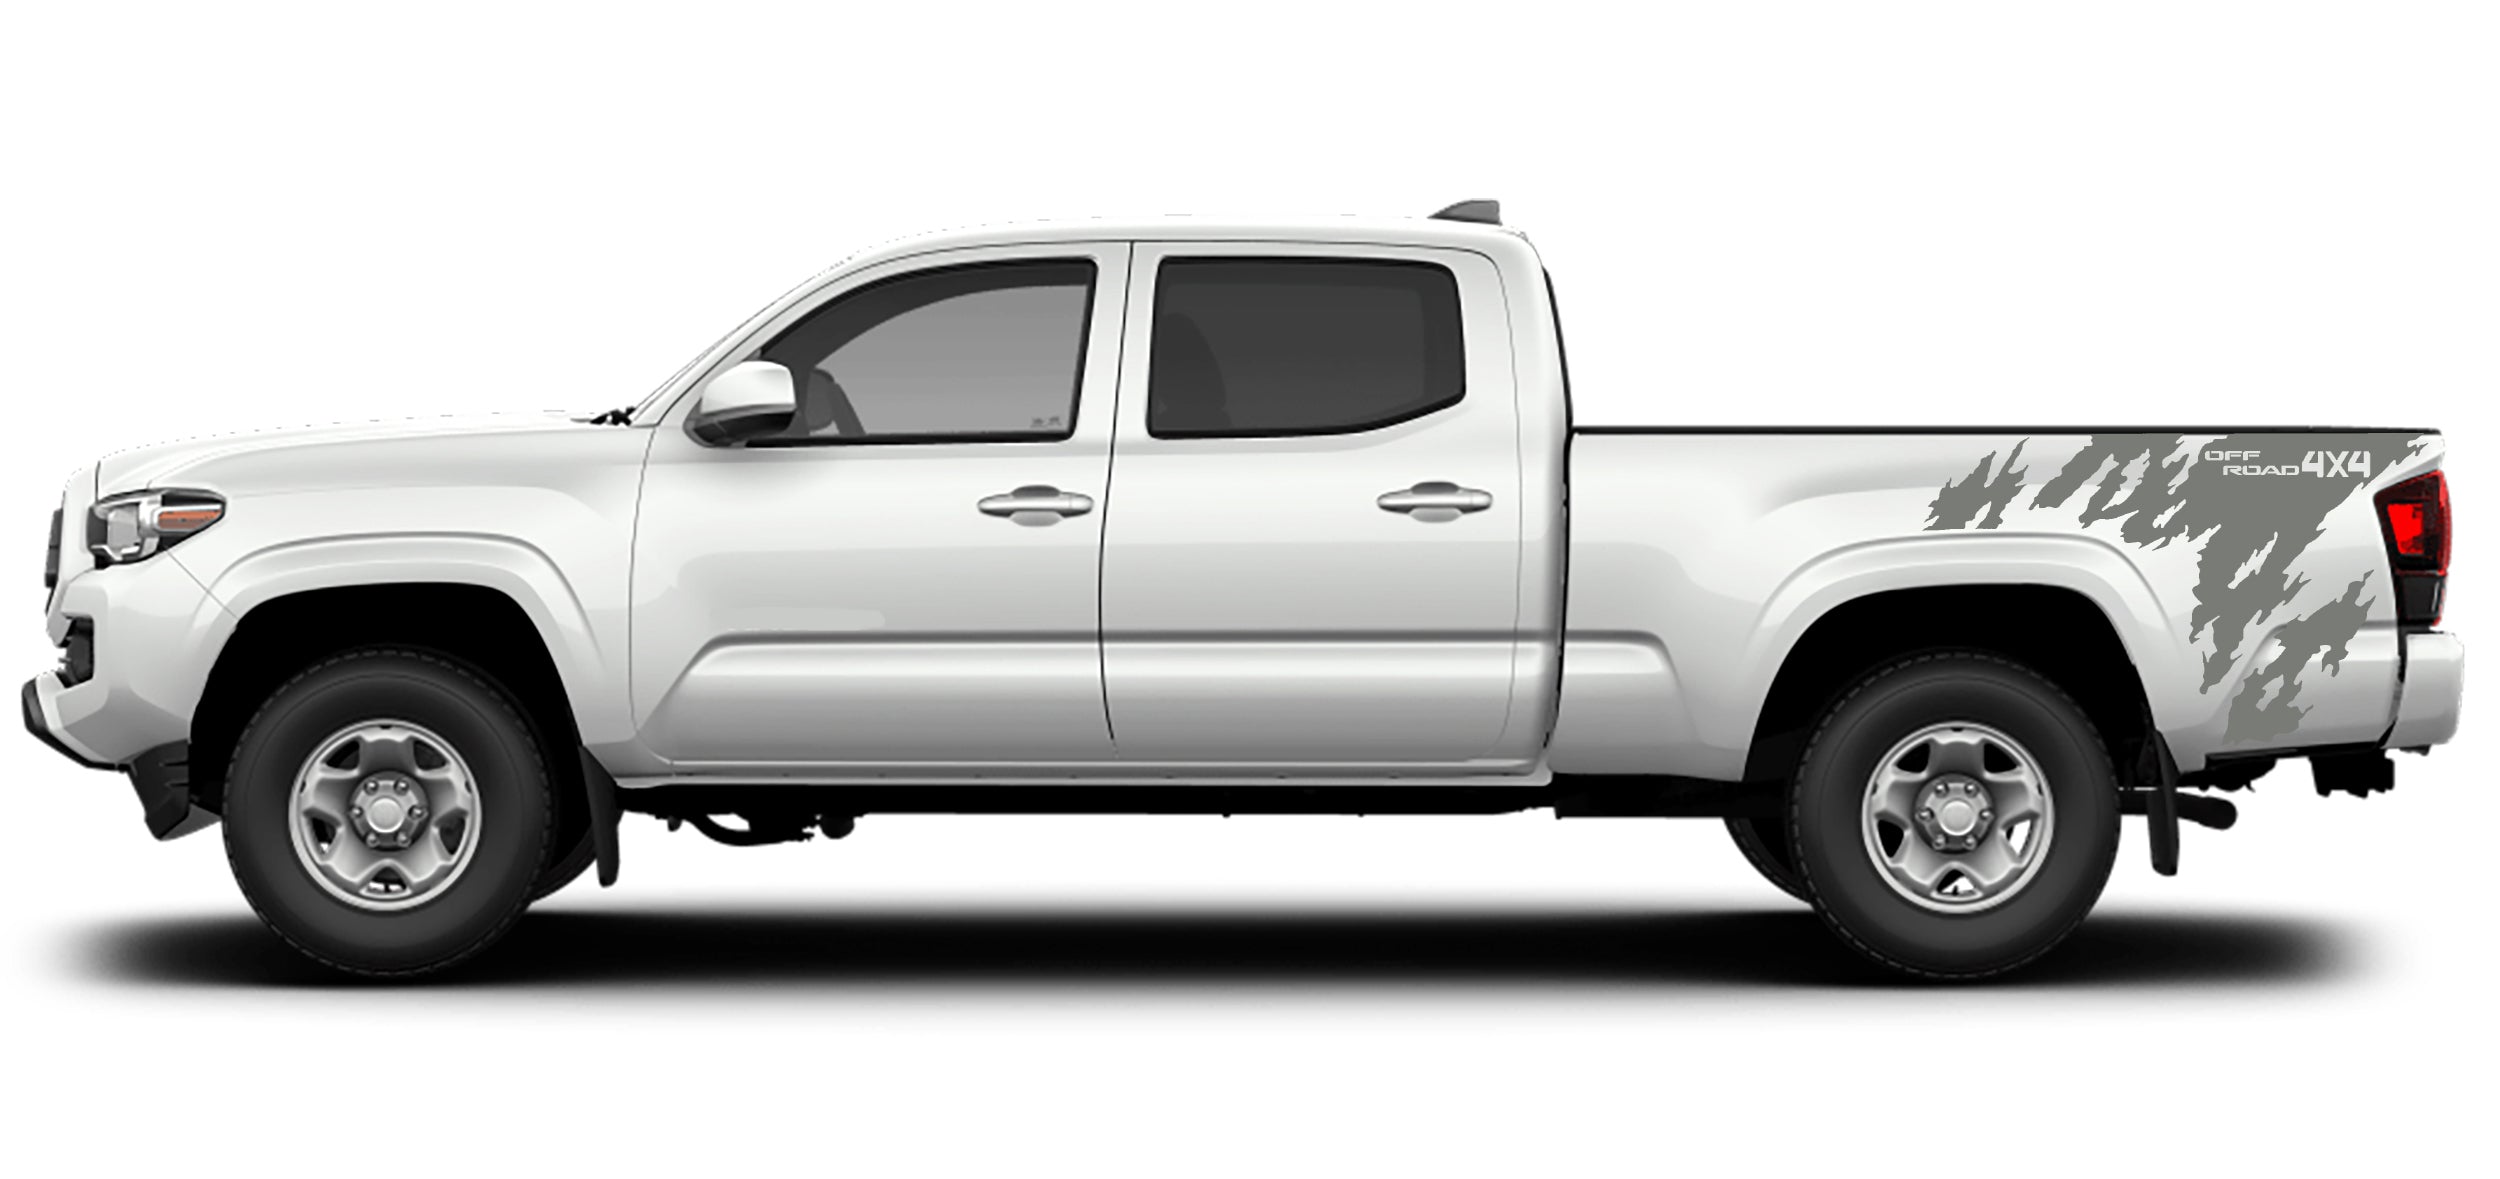 mud splash 4x4 off road bed decals for toyota tacoma 2016 to 2023 models gray